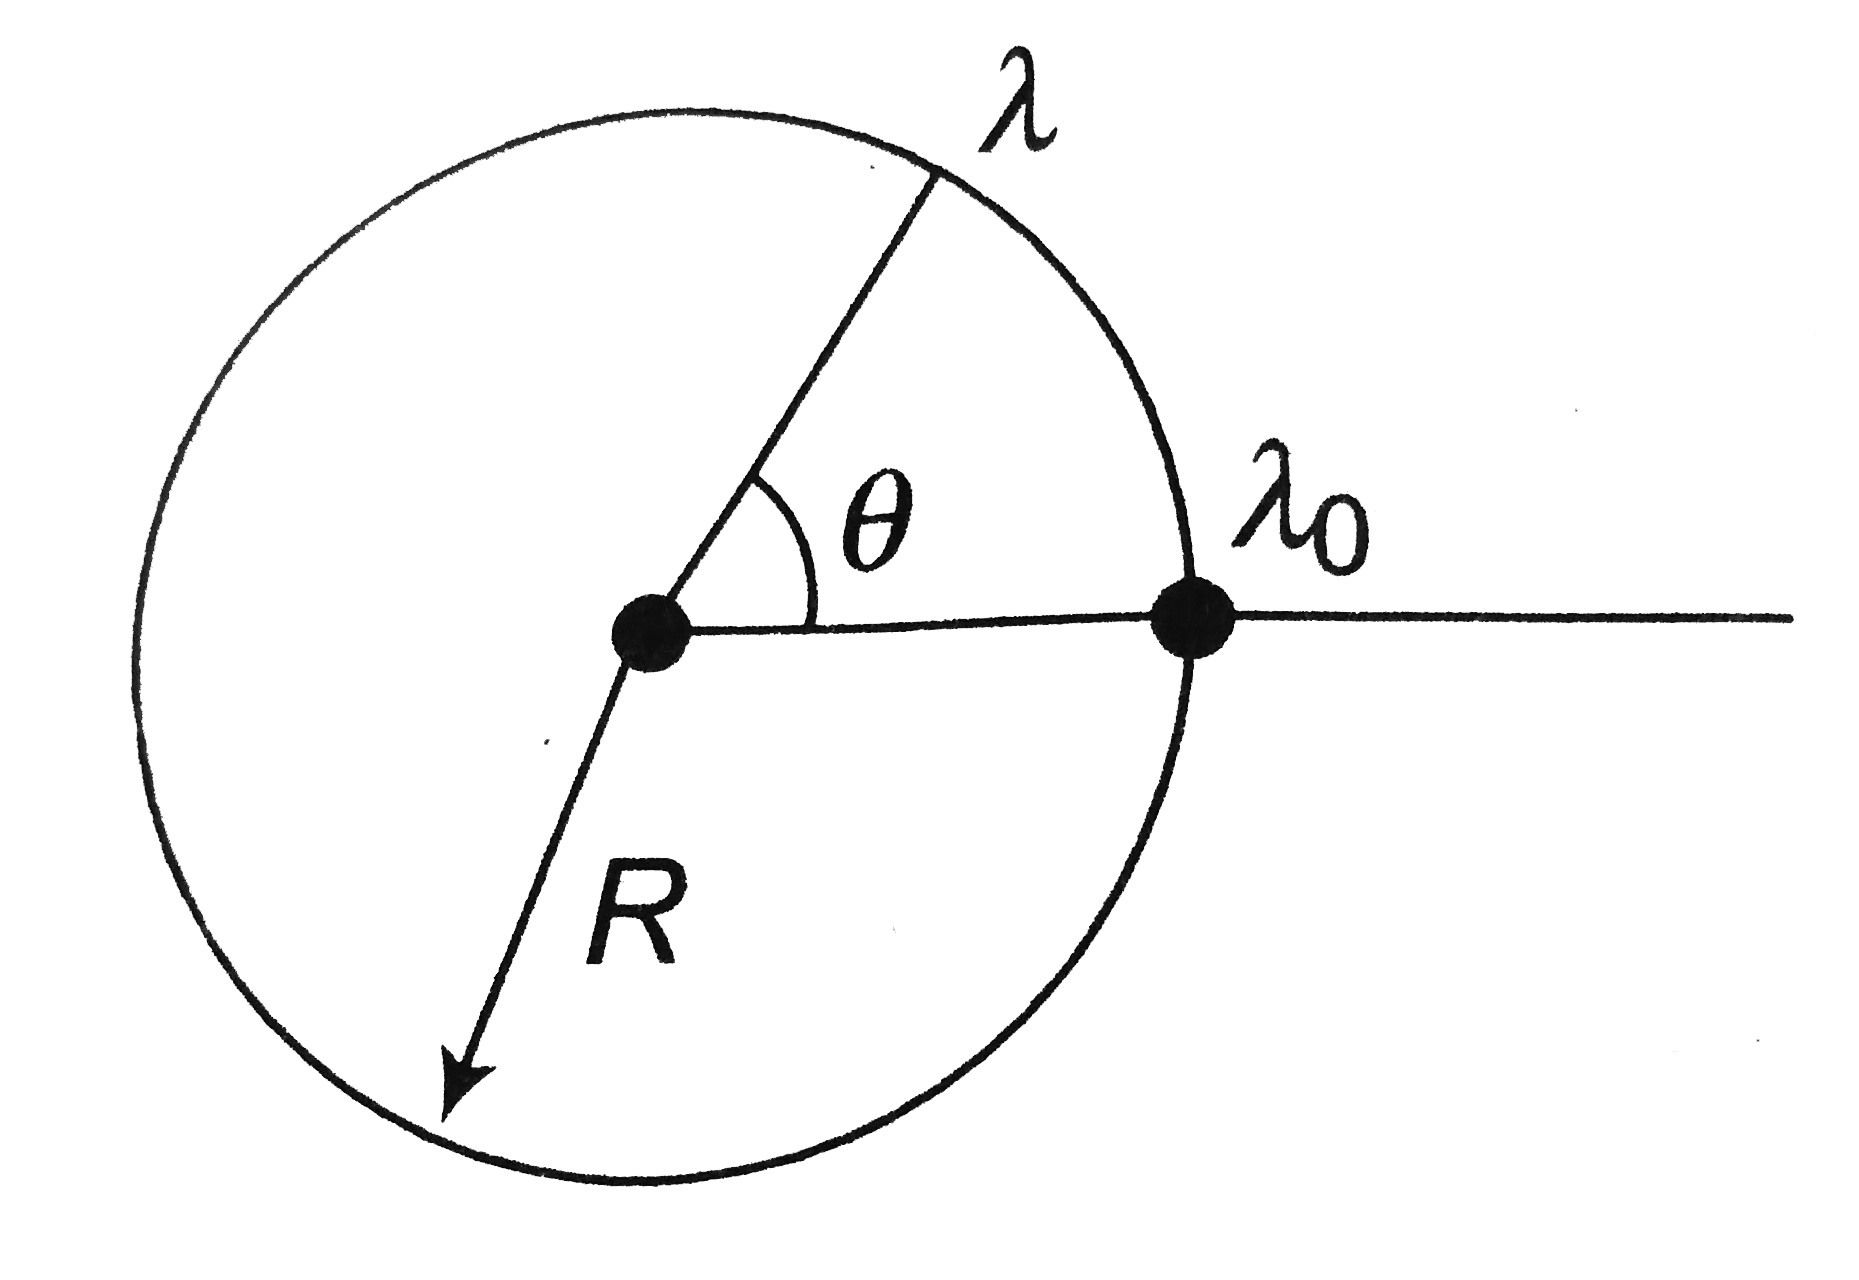 A thin non-conducting ring of radius R has a linear charge density lambda=lambda(0) cos theta, where theta is measured as shown. The total electric dipole moment of the charge distribution is